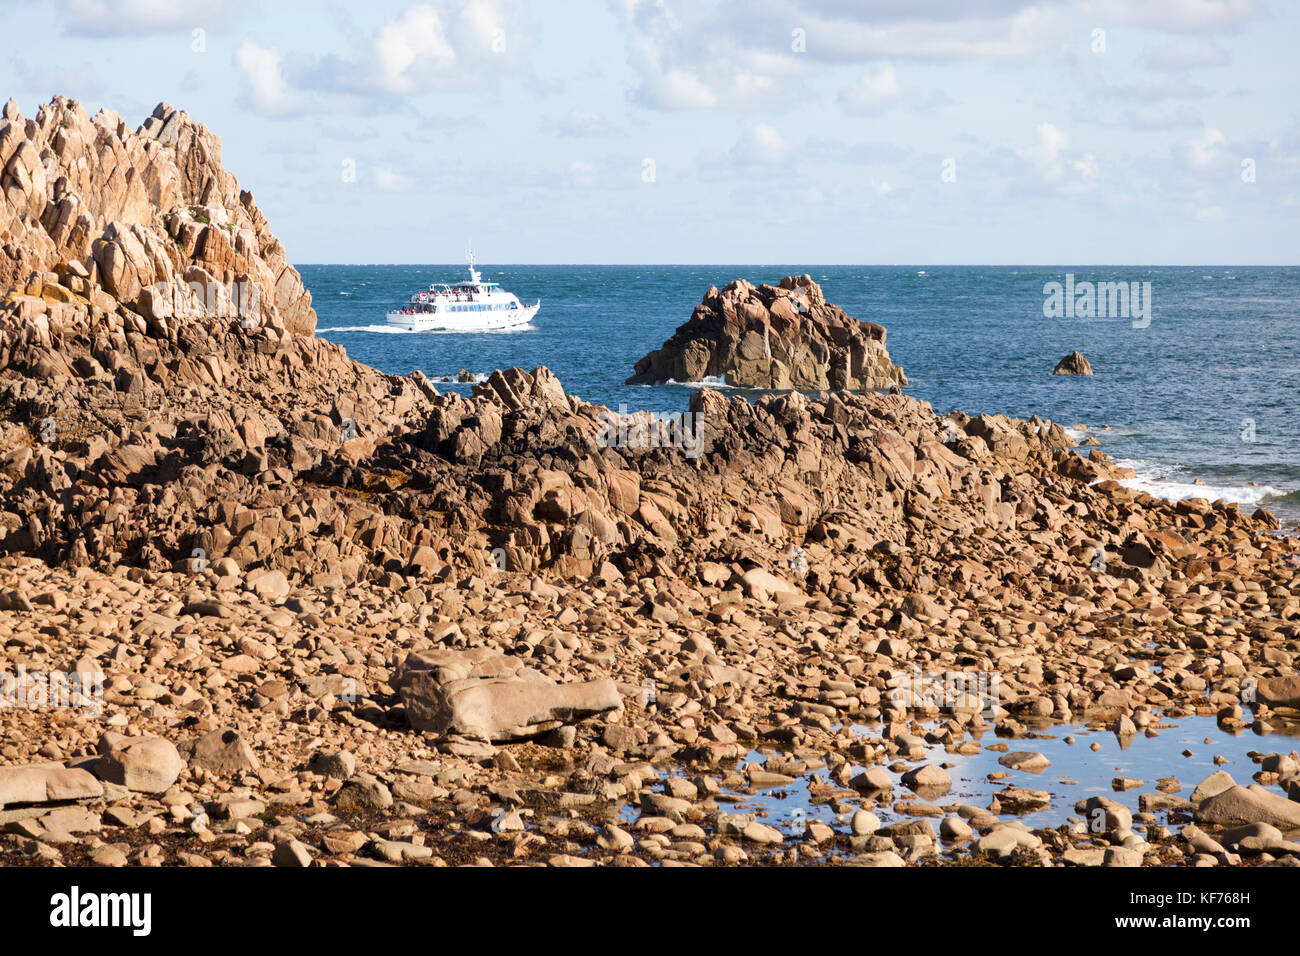 The Brehat island discovery from the sea (Brittany). It is possible by launch to get a 45 minute long commented trip of the island. Stock Photo